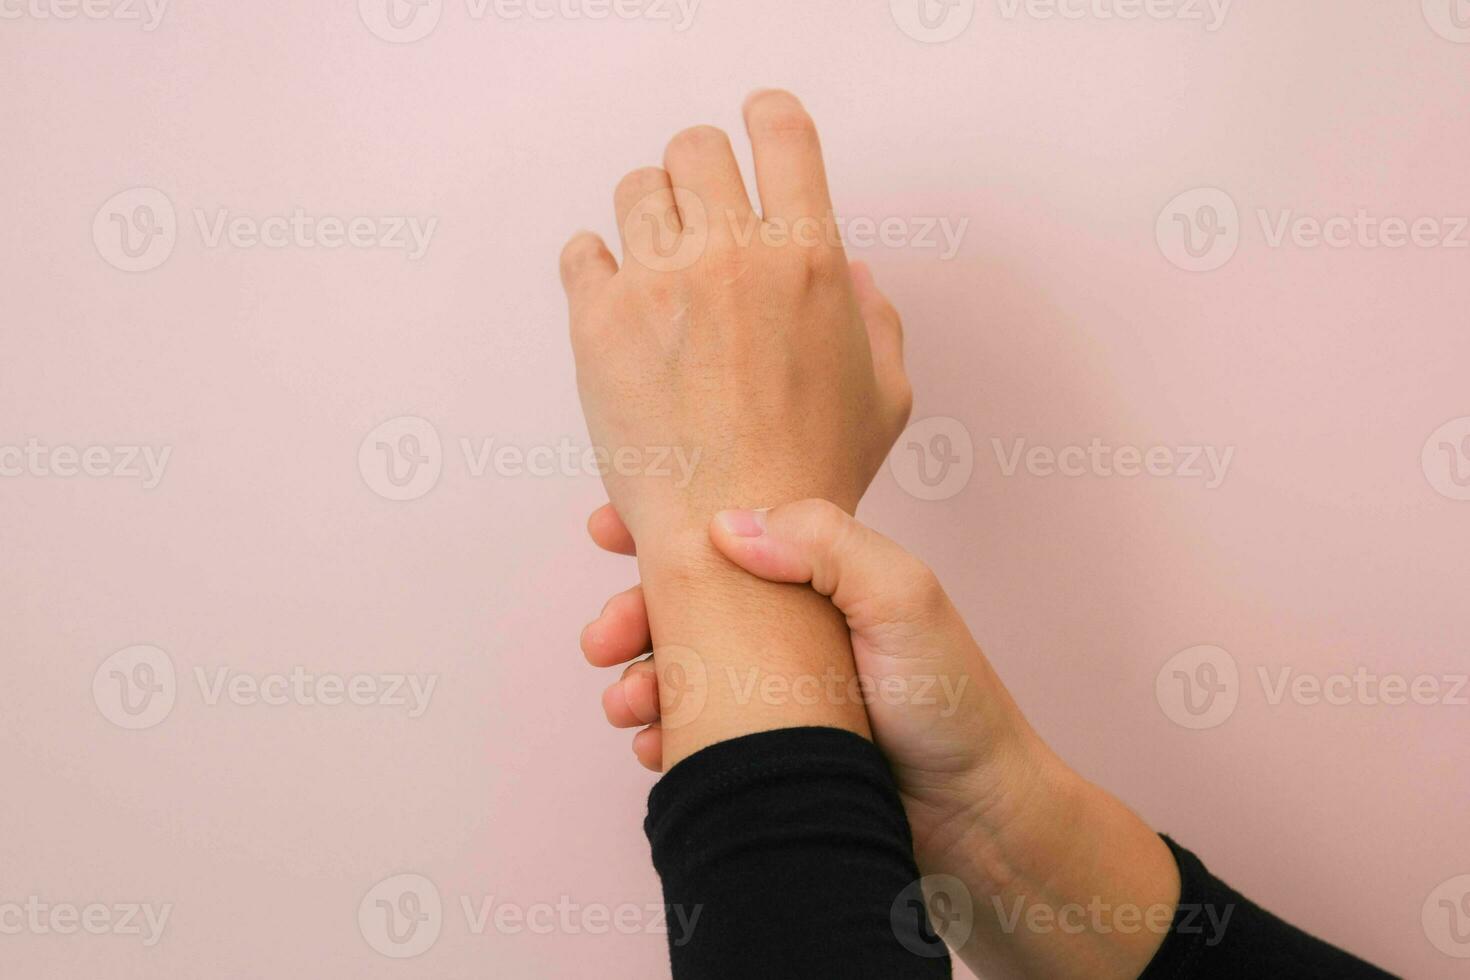 Close-up of woman's hand holding her painful wrist from Arthritis or Carpal Tunnel Syndrome  isolated on pink background. Health care concept. photo